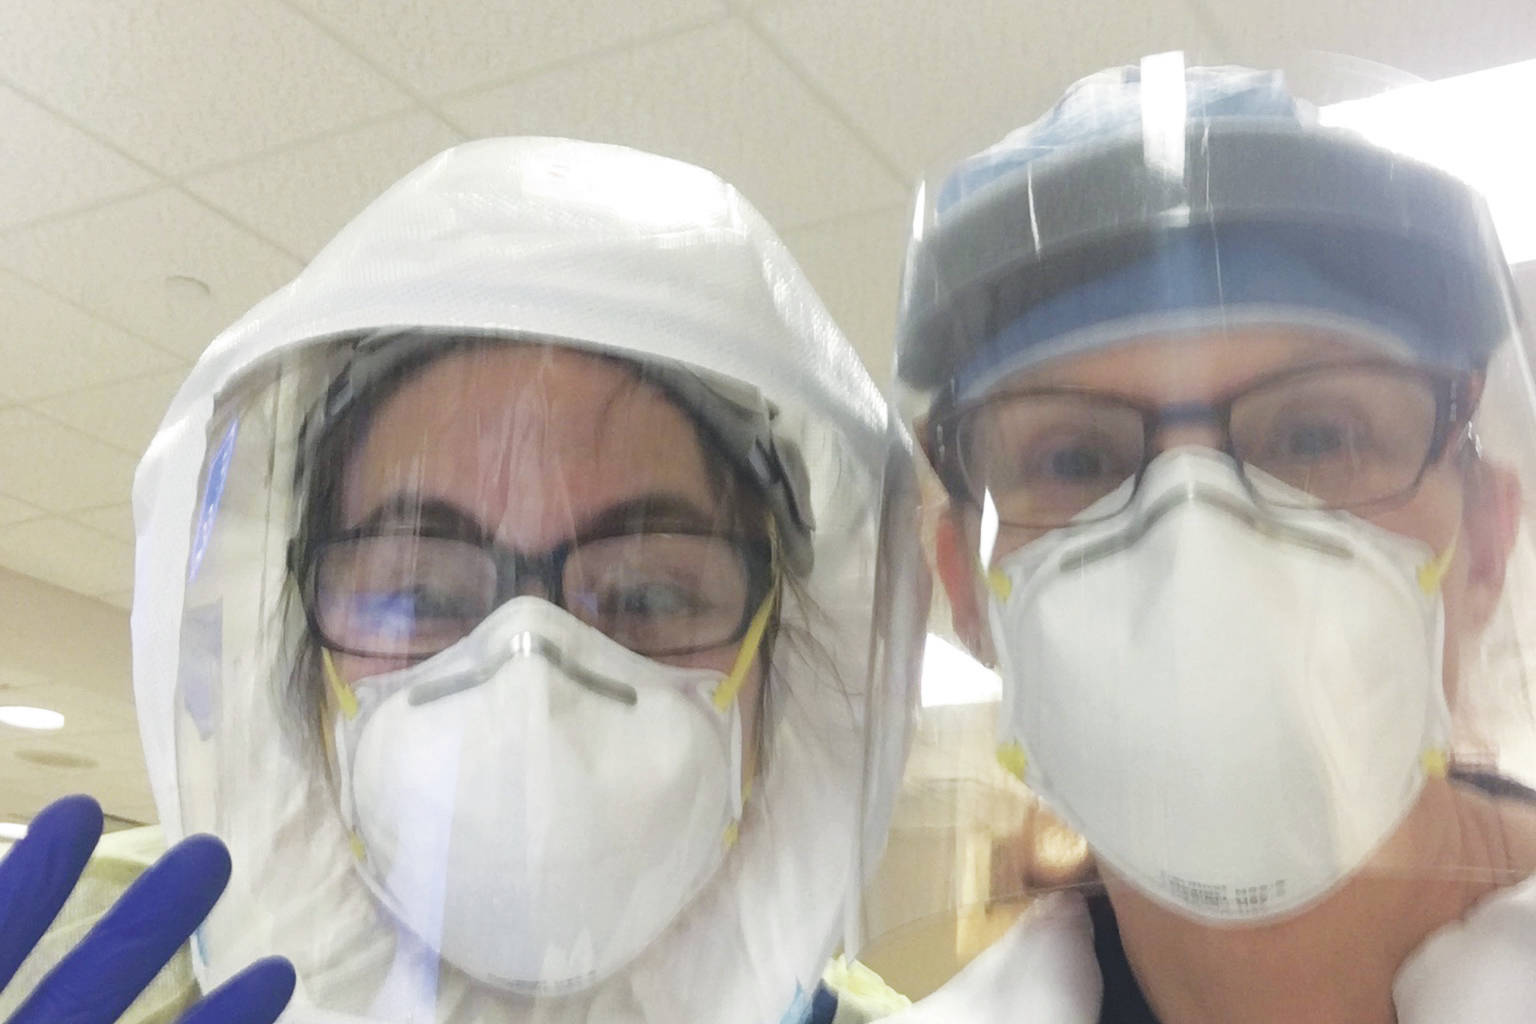 Robin Richardson, right, and her coworker Ellen Paffie from Georgia get ready for the night shift at White Plains Hospital in White Plains, New York on May 7, 2020. (Photo courtesy Robin Richardson)